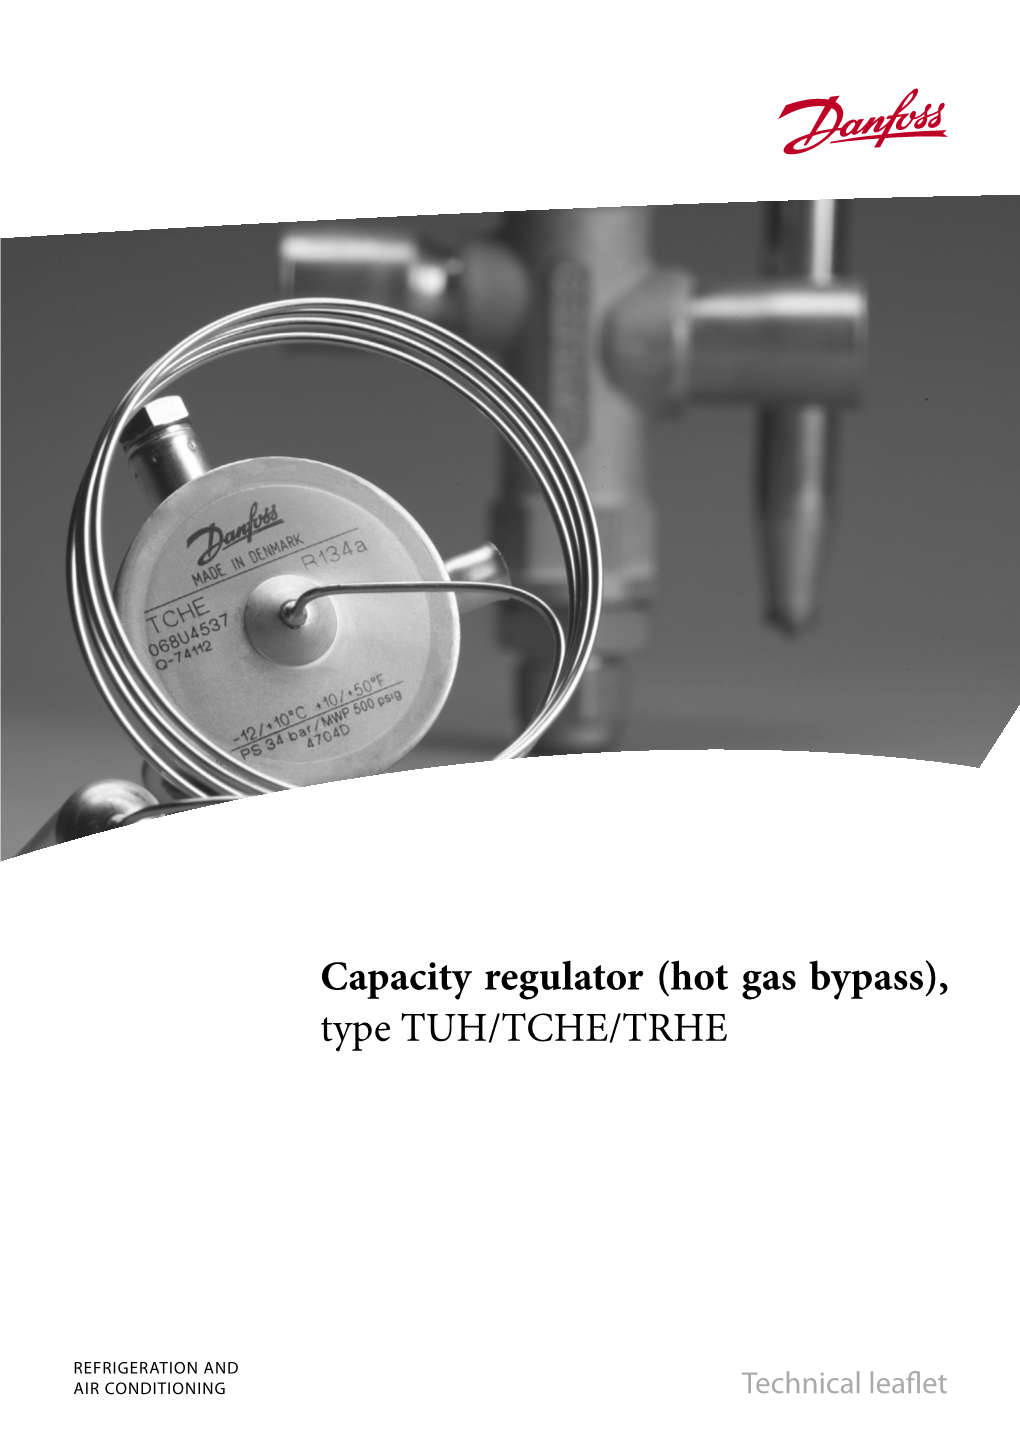 Capacity Regulator (Hot Gas Bypass), Type TUH/TCHE/TRHE